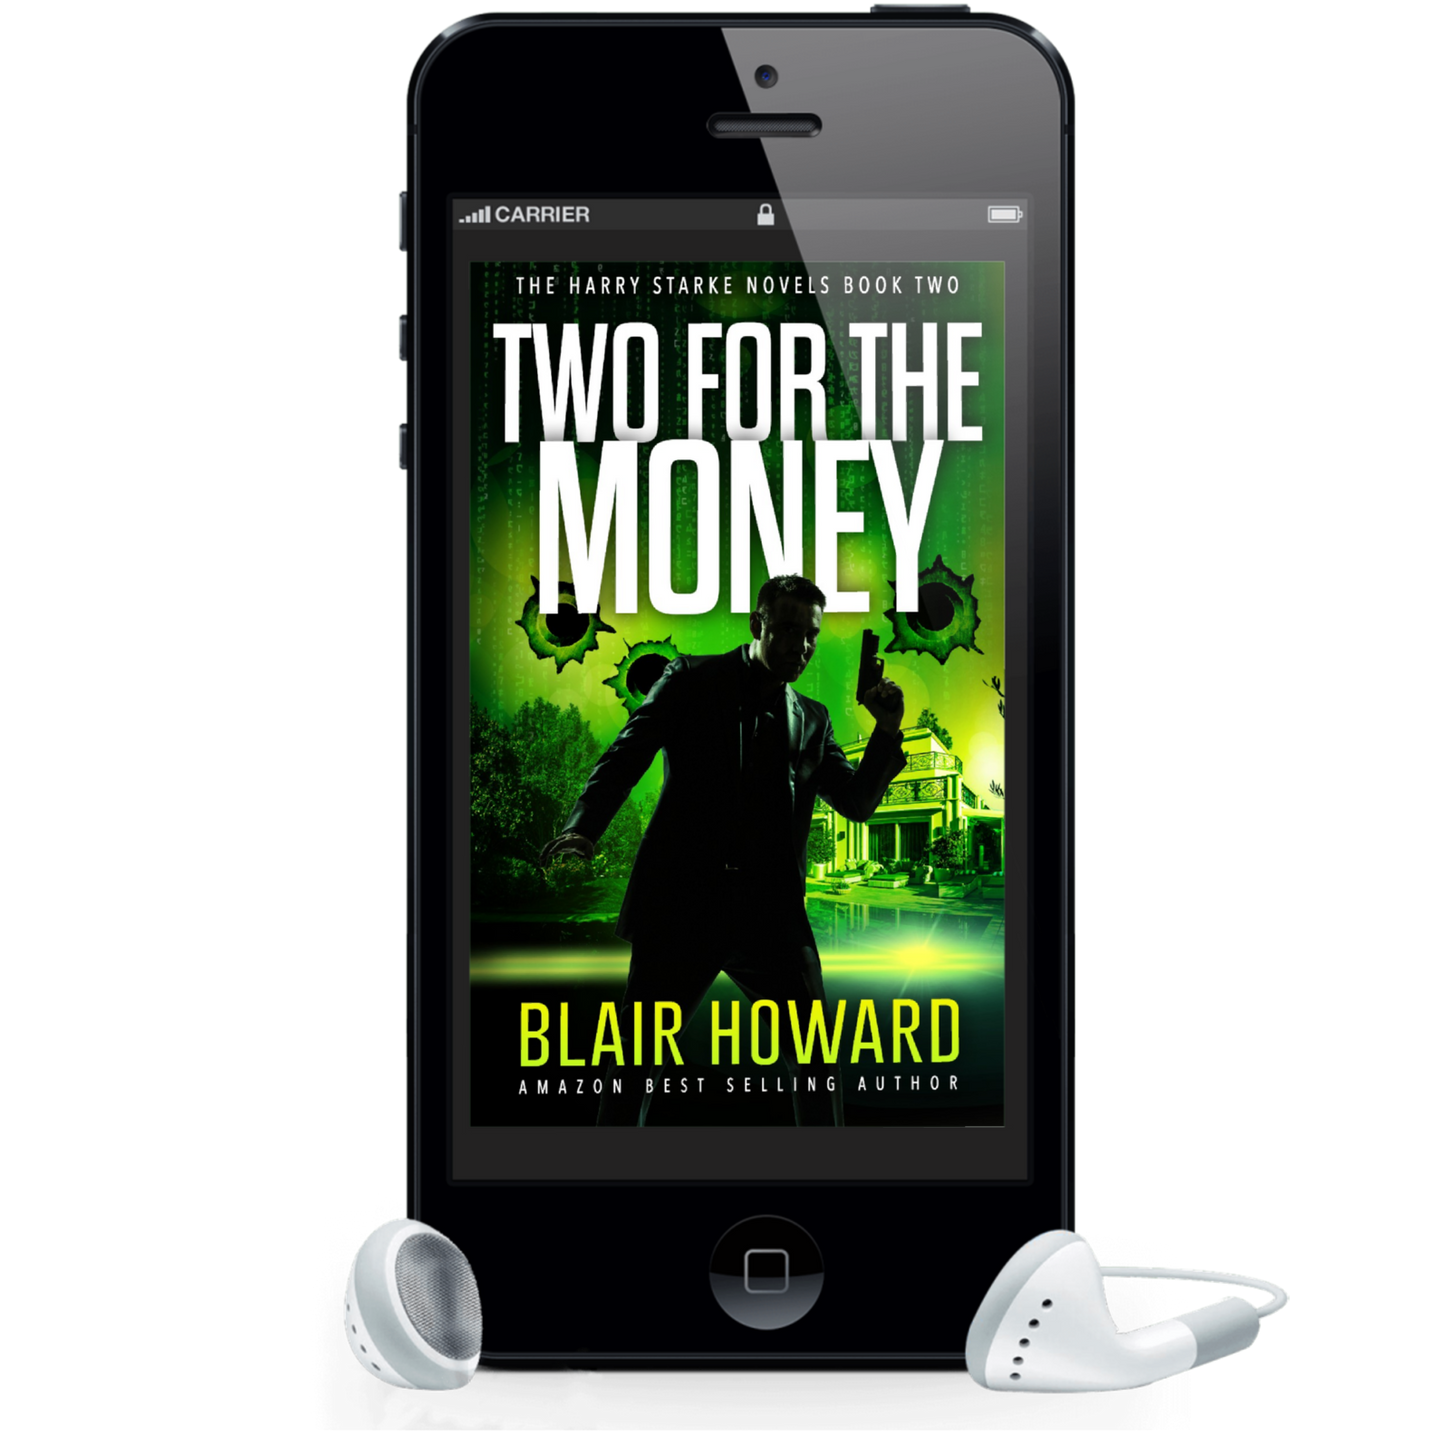 Two For The Money (The Harry Starke Novels Book 2)